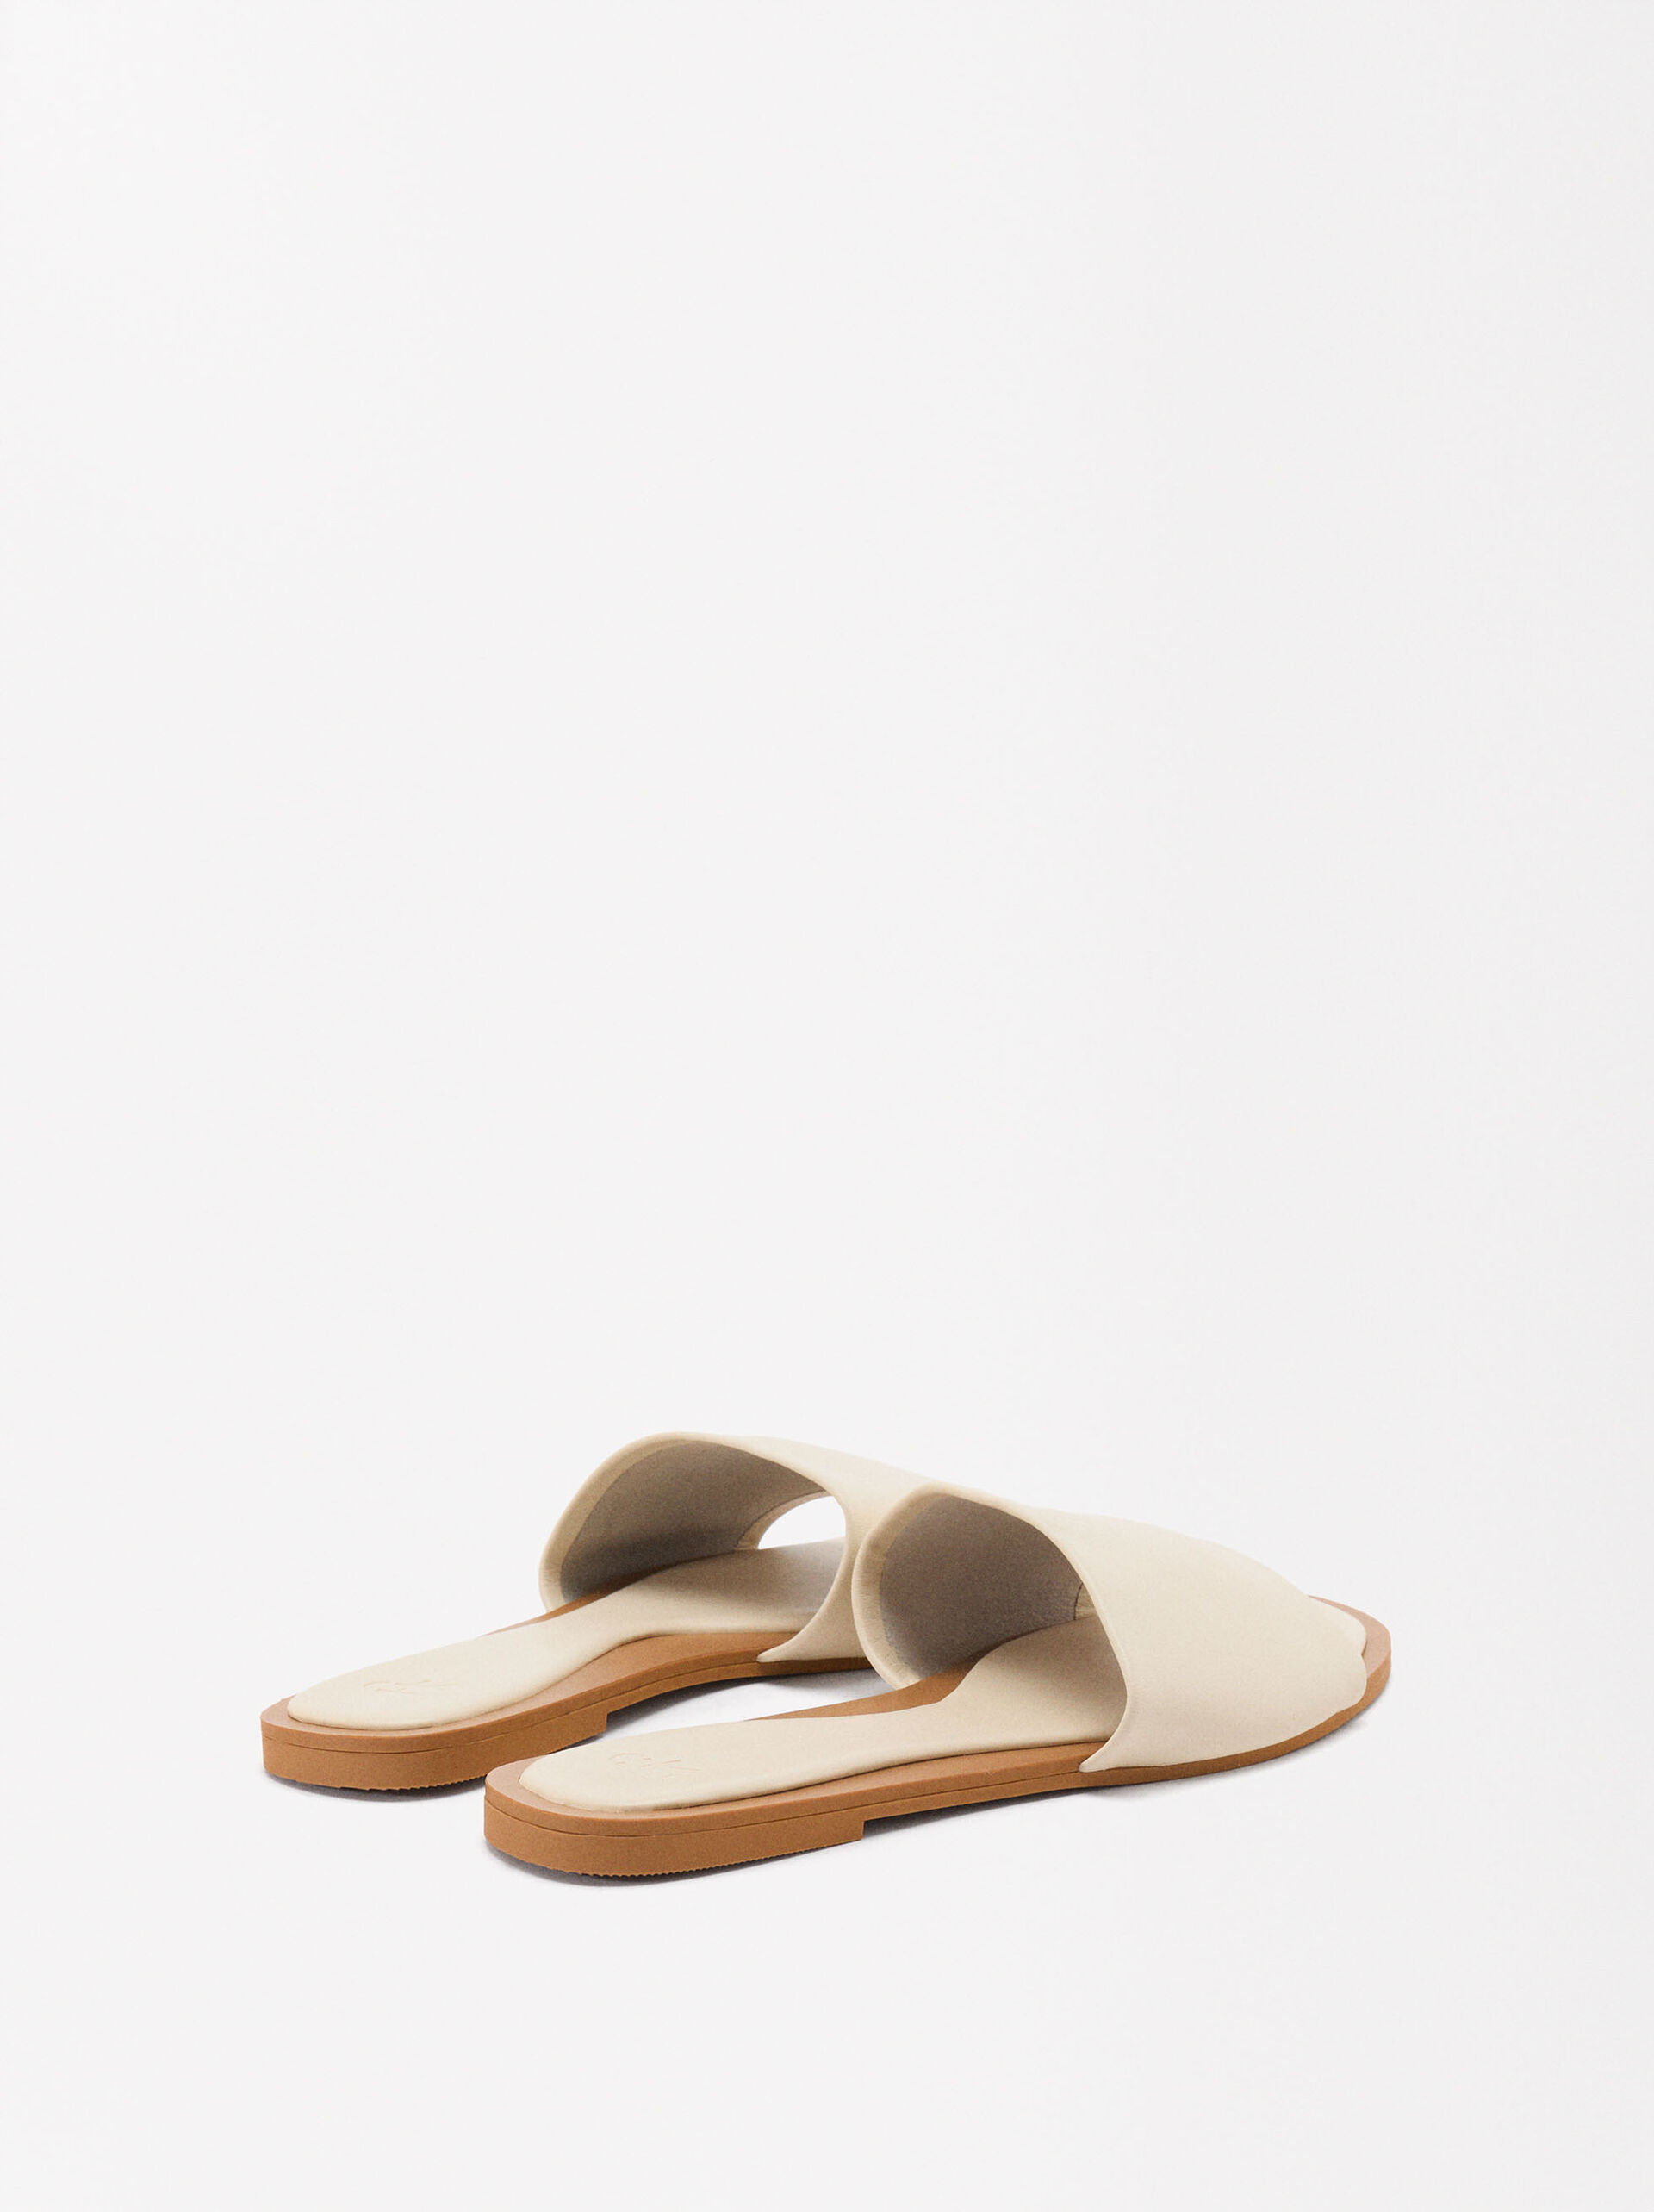 Napa Leather Sandals image number 4.0